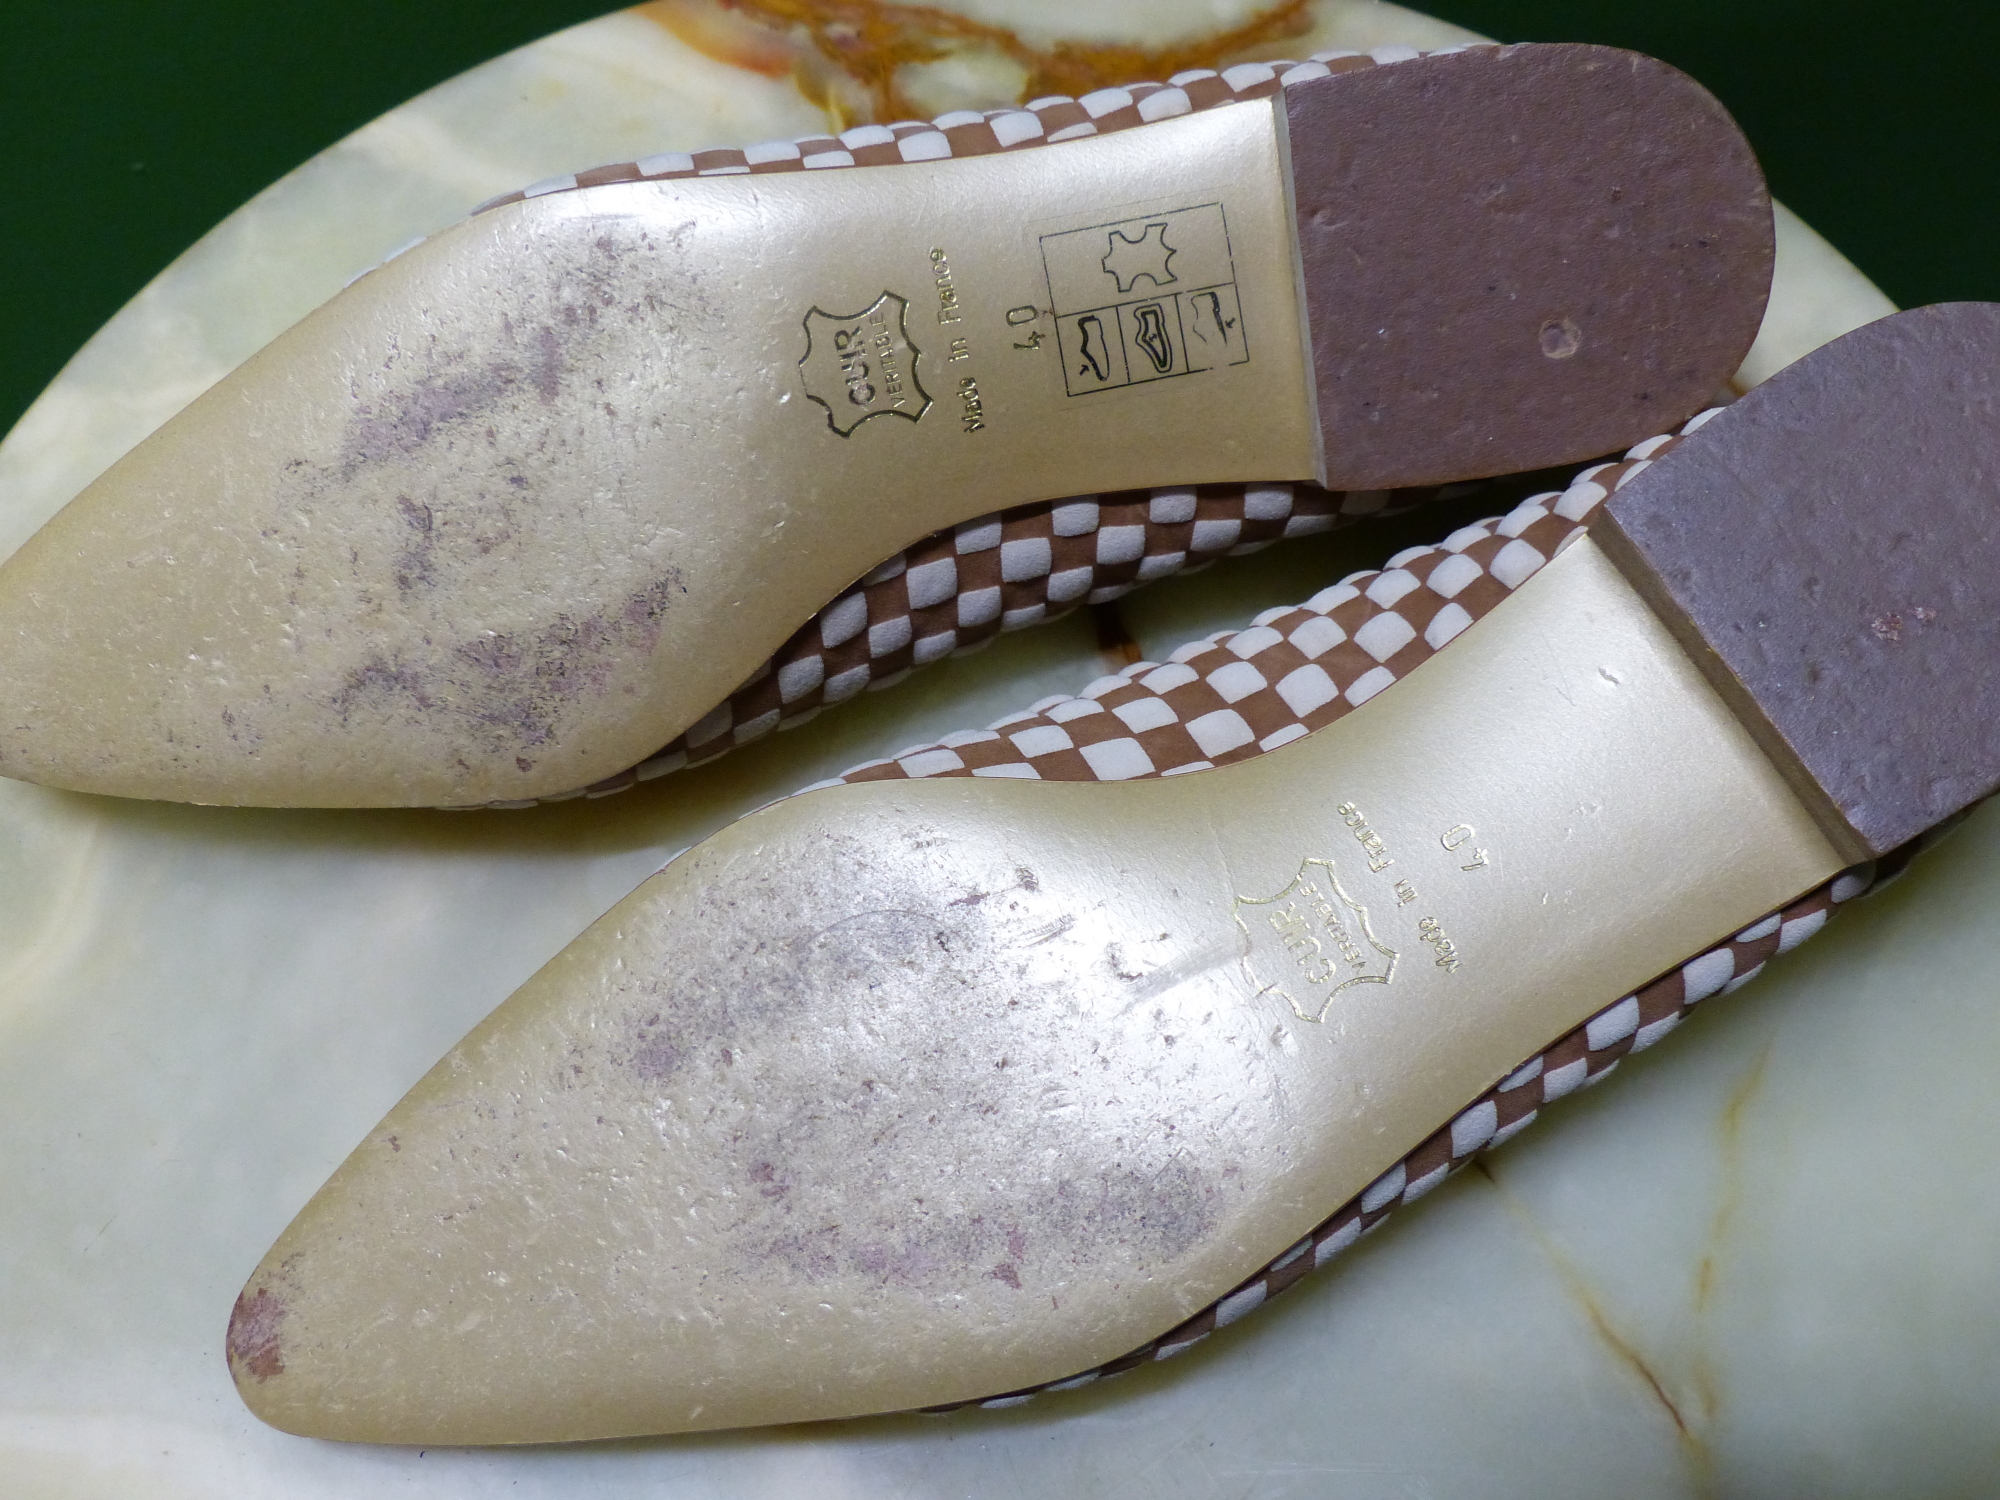 SHOES. TWO PAIRS PANTALON CHAMELEON FRENCH SIZE EUR 40 TAN AND BEIGE SUEDE SLIP ON'S, AND CREAM - Image 4 of 9